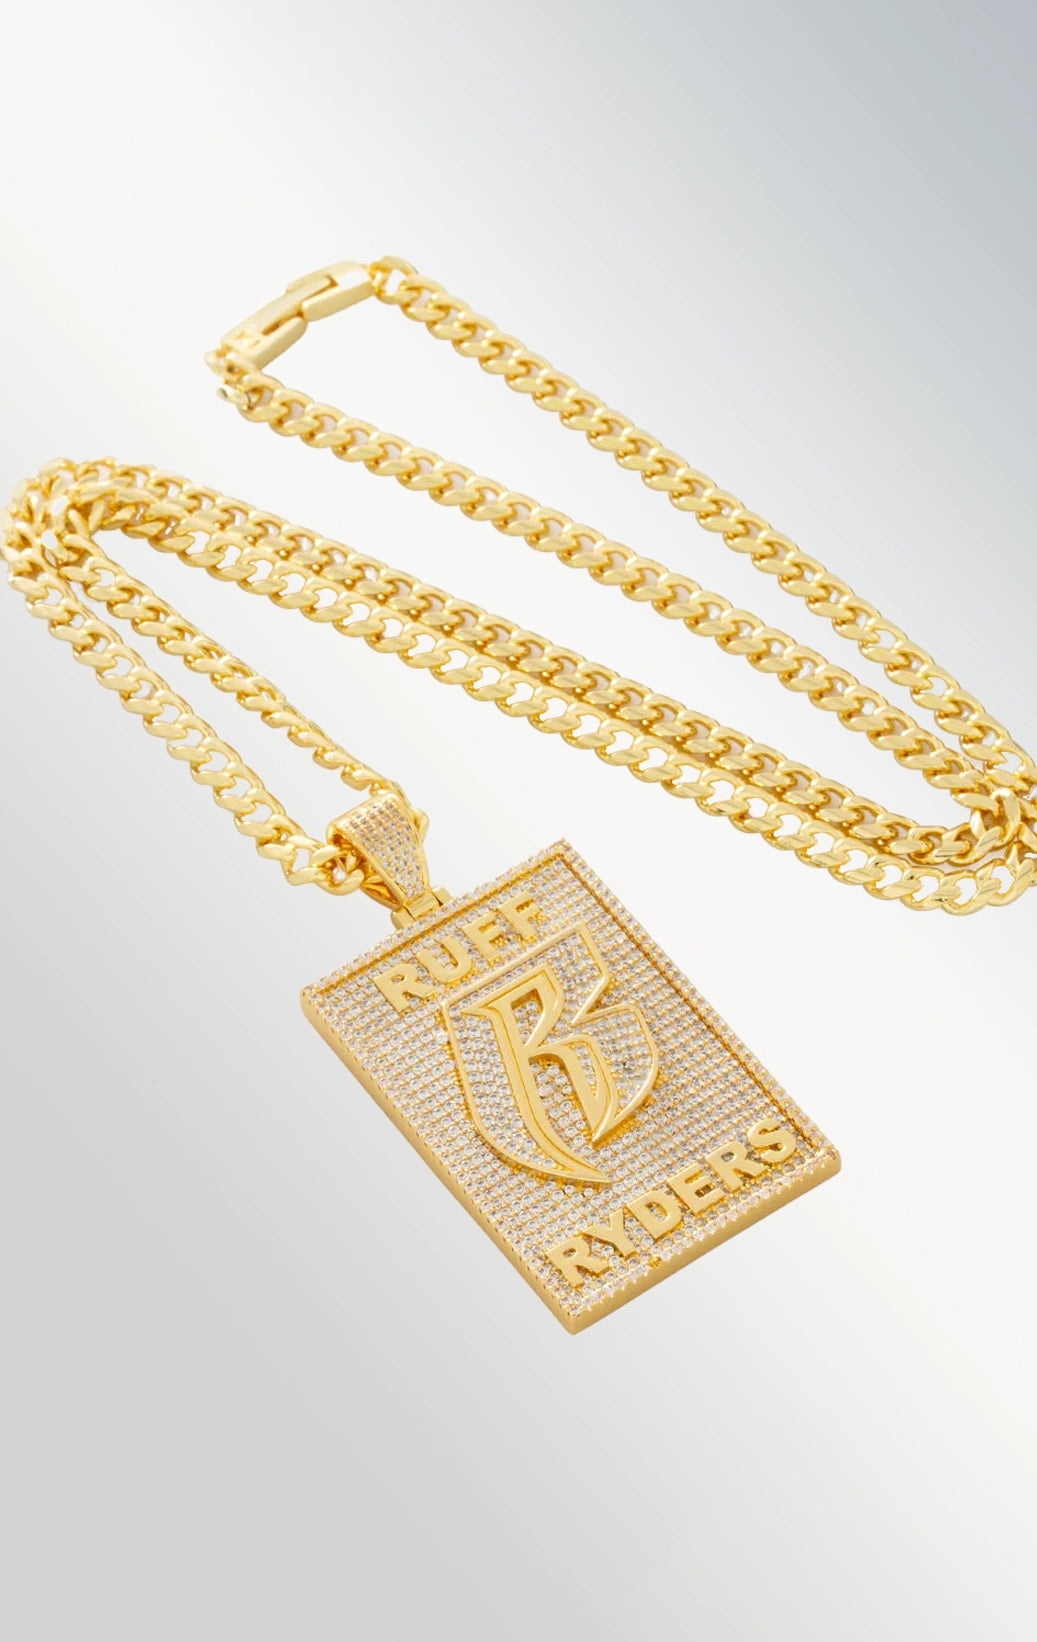 Dog tag ruff ryders pendant necklace in  gold